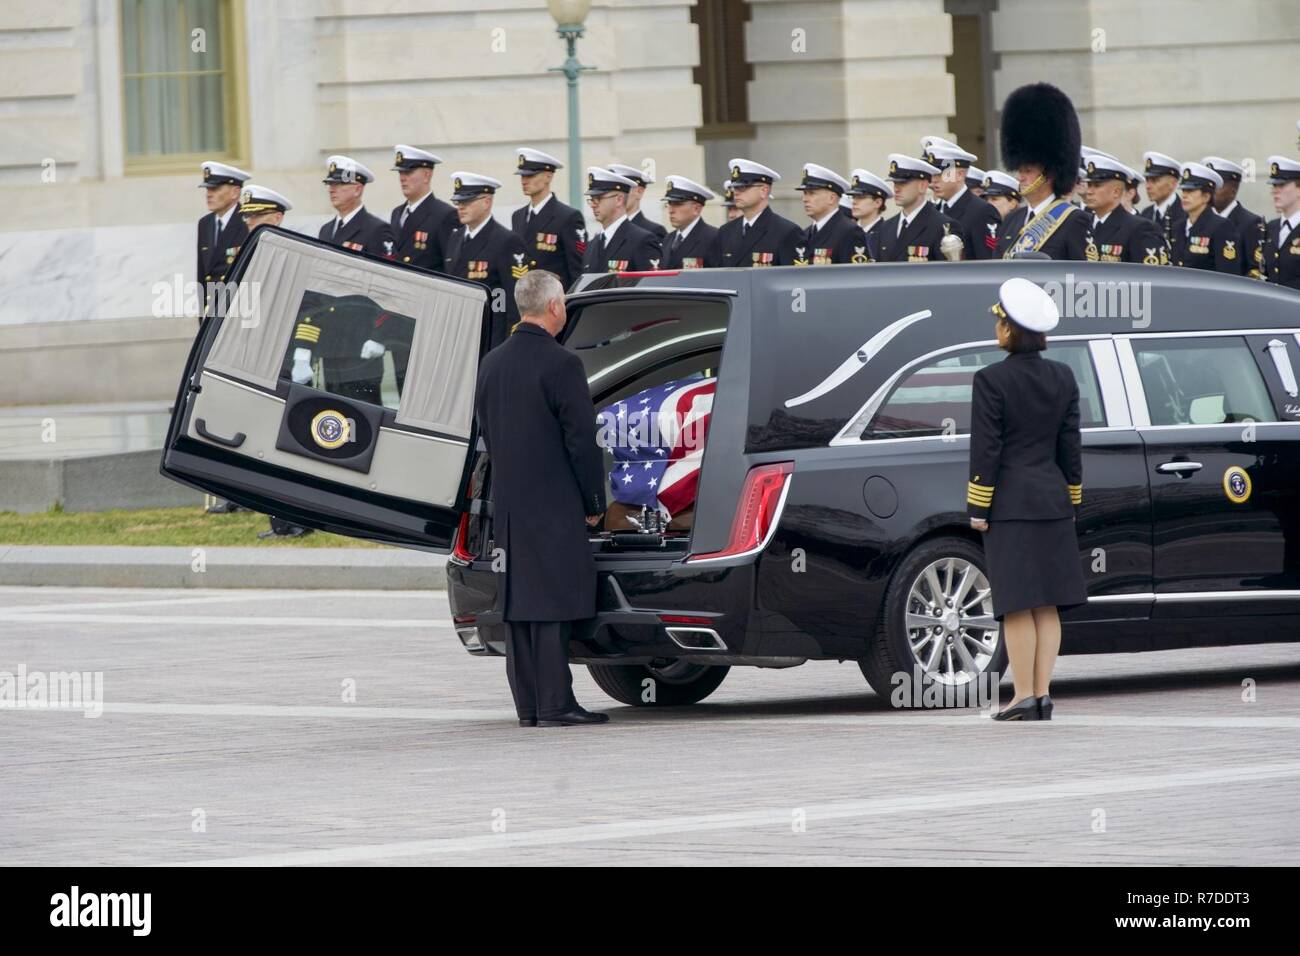 The hearse carrying the flag-draped casket of George H.W. Bush, 41st President of the United States, prepares to depart to the Washington National Cathedral, Washington, D.C., Dec. 5, 2018. Nearly 4,000 military and civilian personnel from across all branches of the U.S. armed forces, including Reserve and National Guard Components, provided ceremonial support during George H.W. Bush’s, the 41st President of the United States state funeral. (DoD Stock Photo